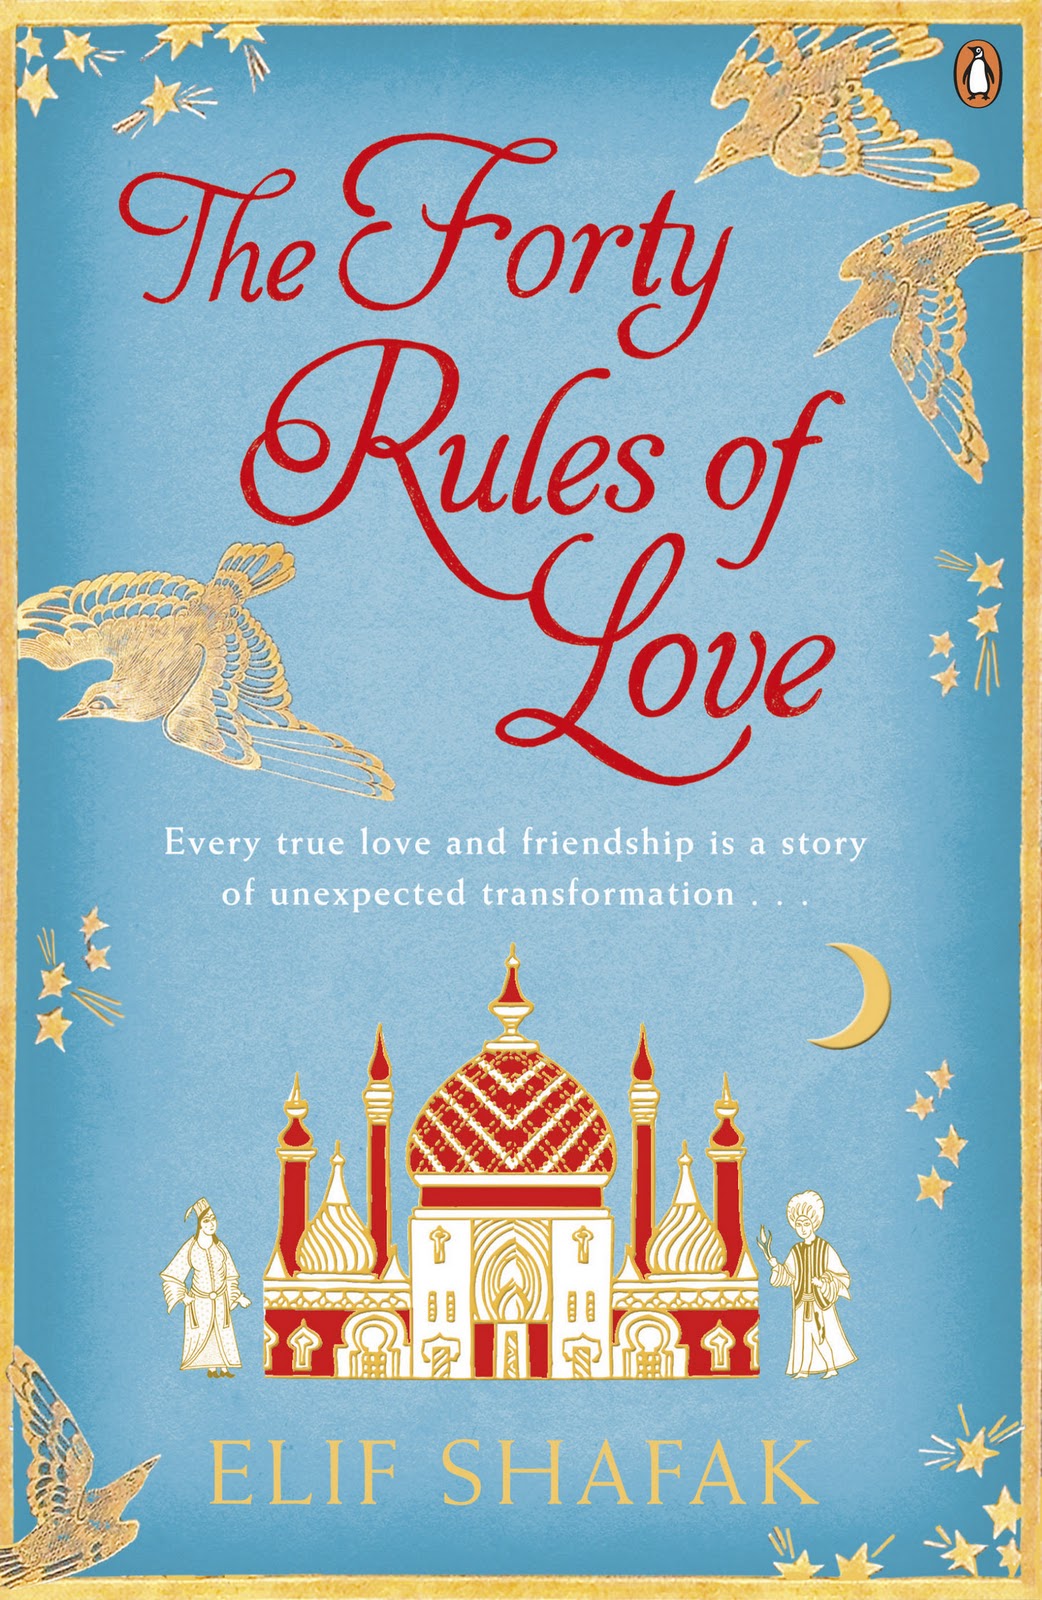 Book-Ish: Review: The Forty Rules of Love by Elif Shafak